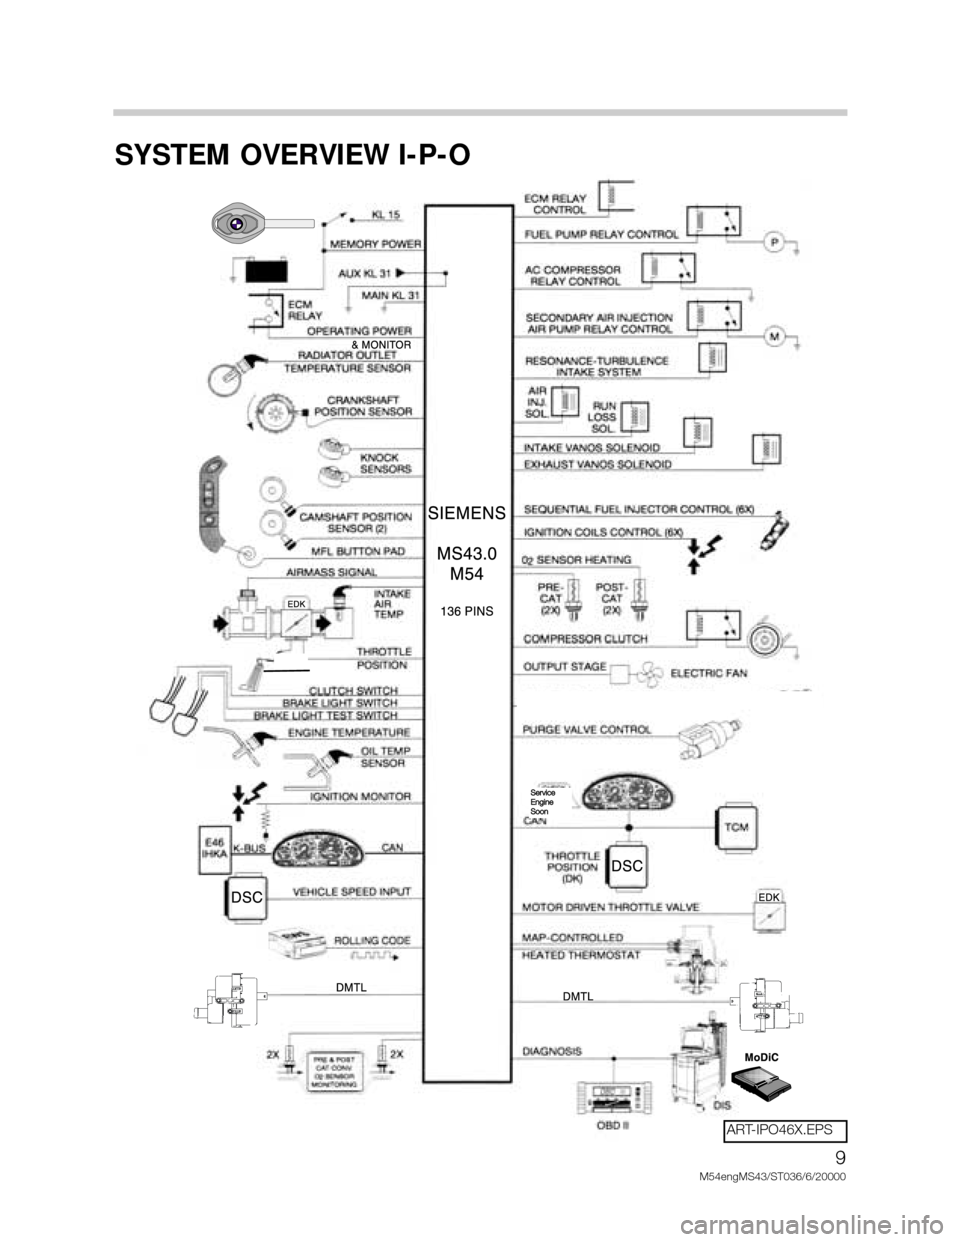 BMW X5 2005 E53 M54 Engine Workshop Manual 9
M54engMS43/ST036/6/20000
SYSTEM OVERVIEW I-P-O
Service 
Engine
Soon
ART-IPO46X.EPS 